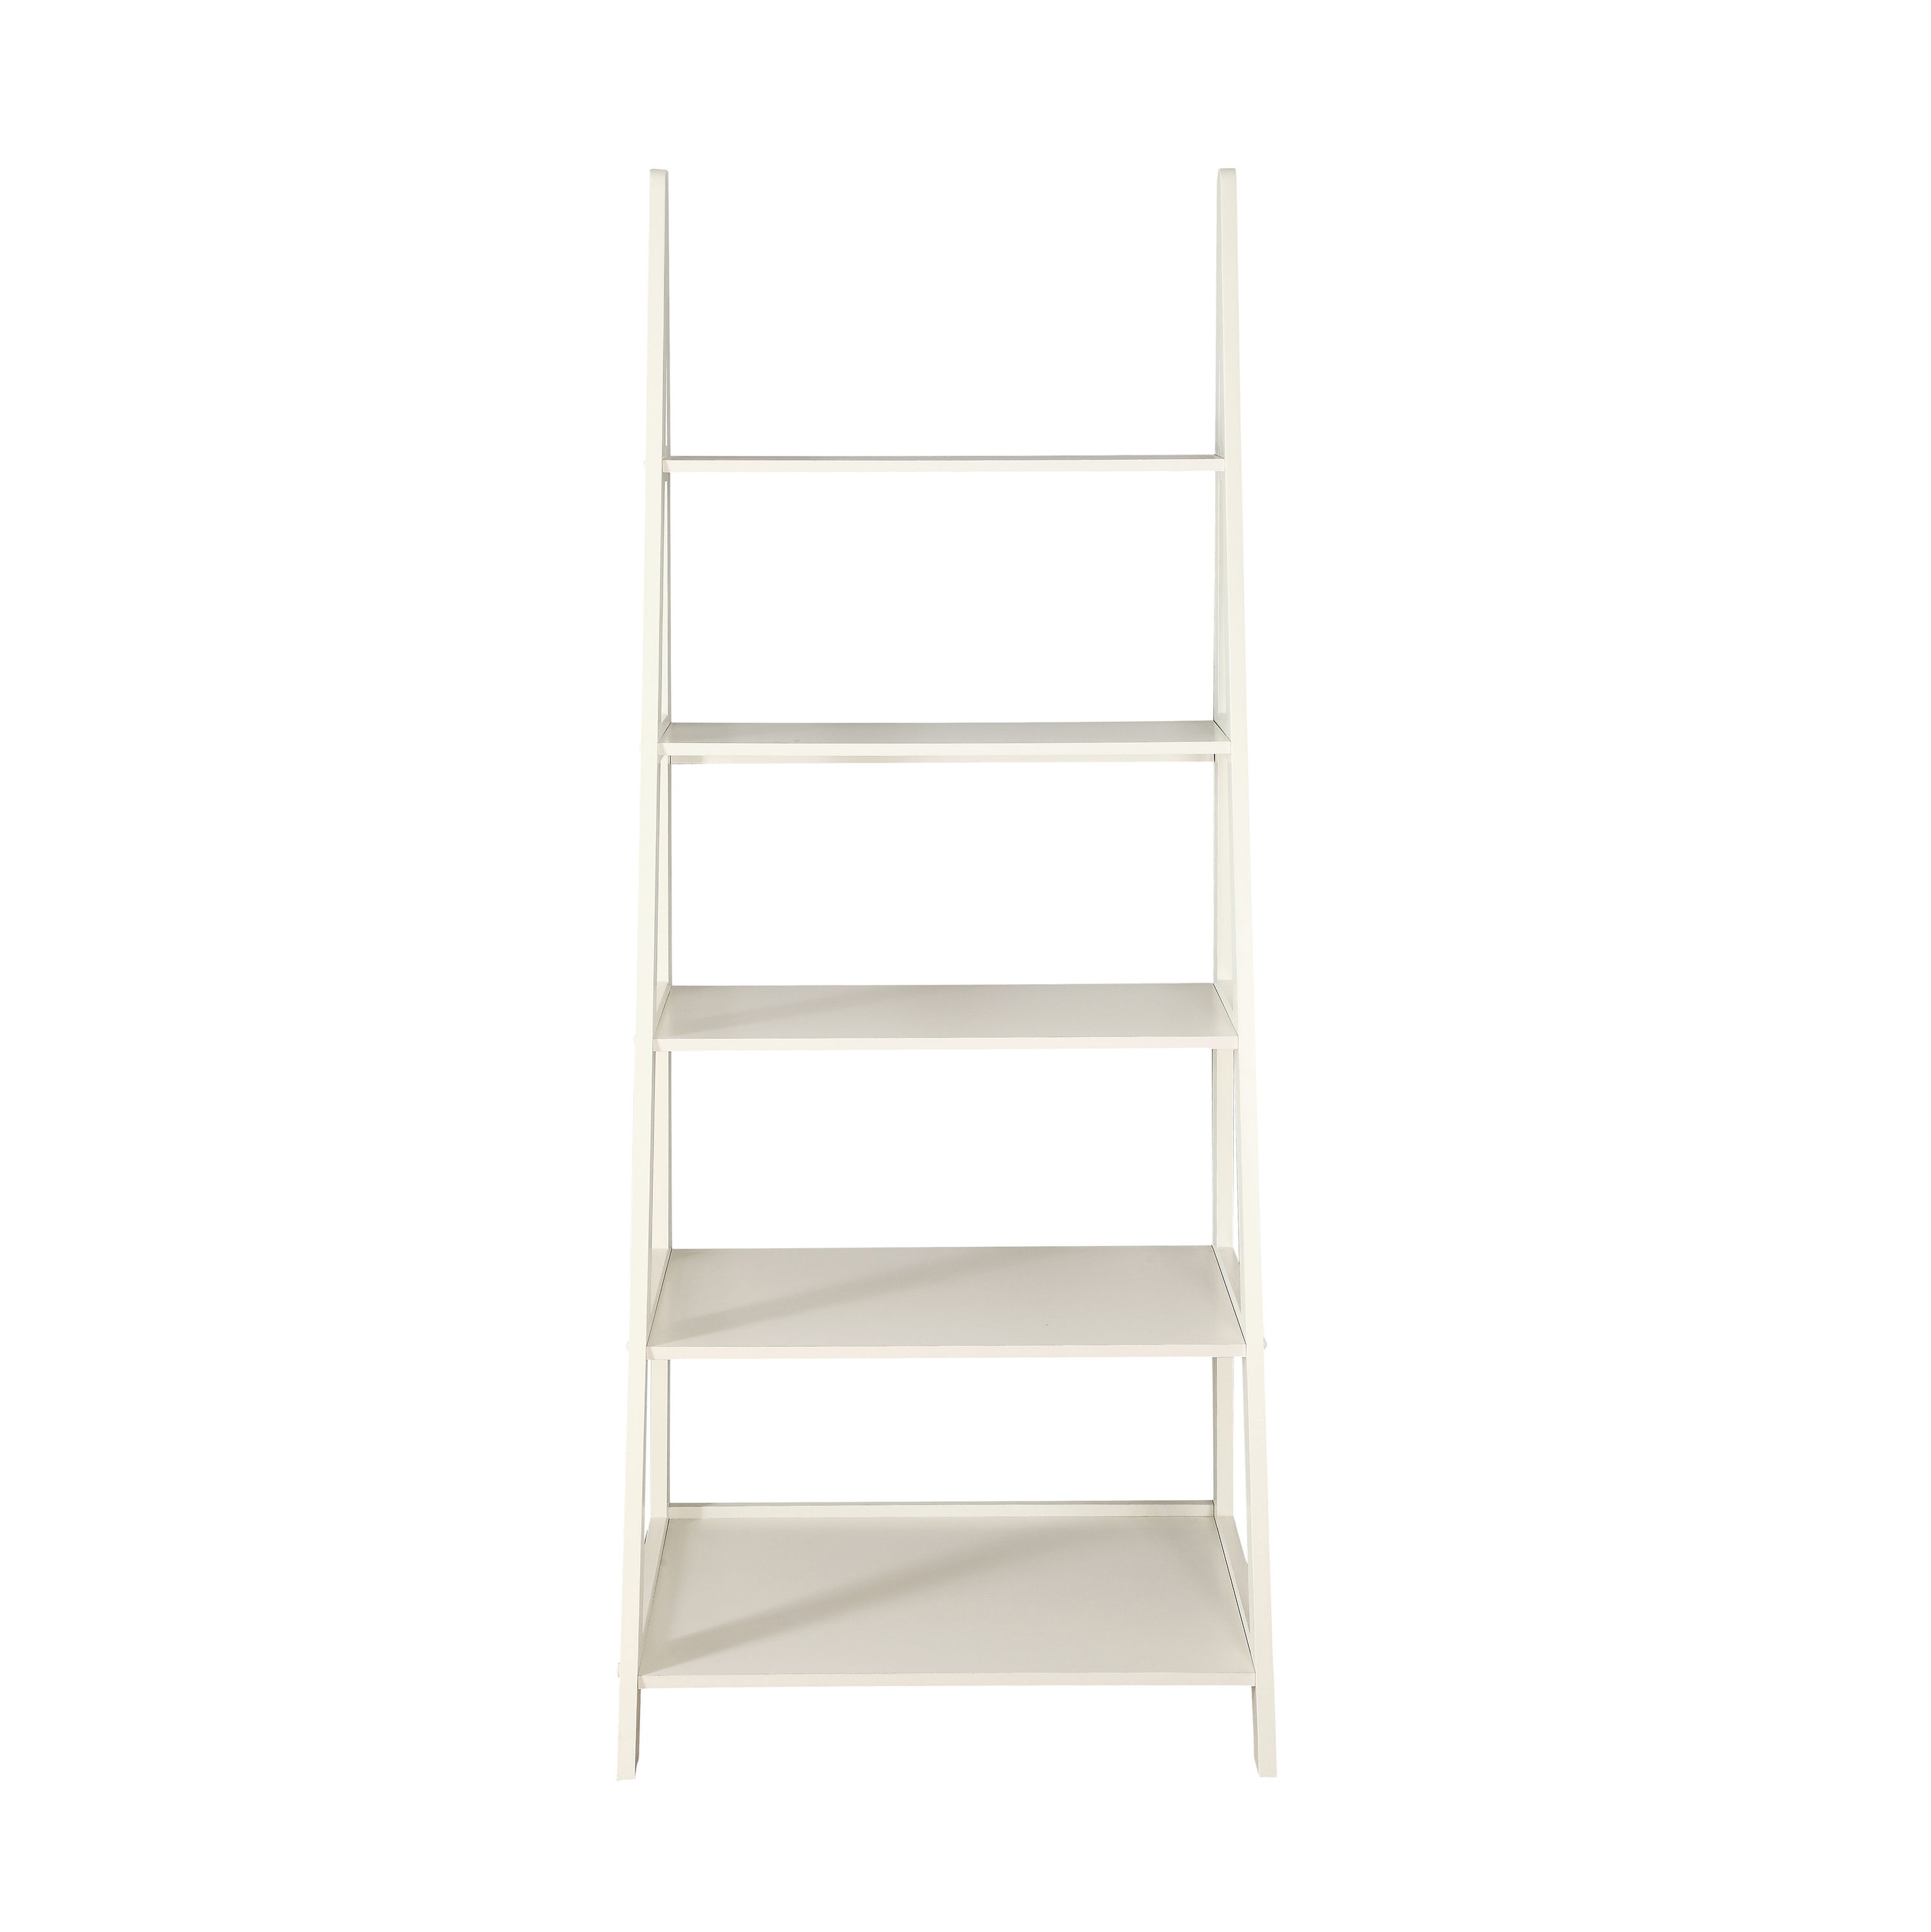 Belray Furnishings & Decor Center Ladder Polar Off-white Wood 5-Shelf Ladder Bookcase (18-in W 72-in H x 28-in D) in Bookcases department at Lowes.com